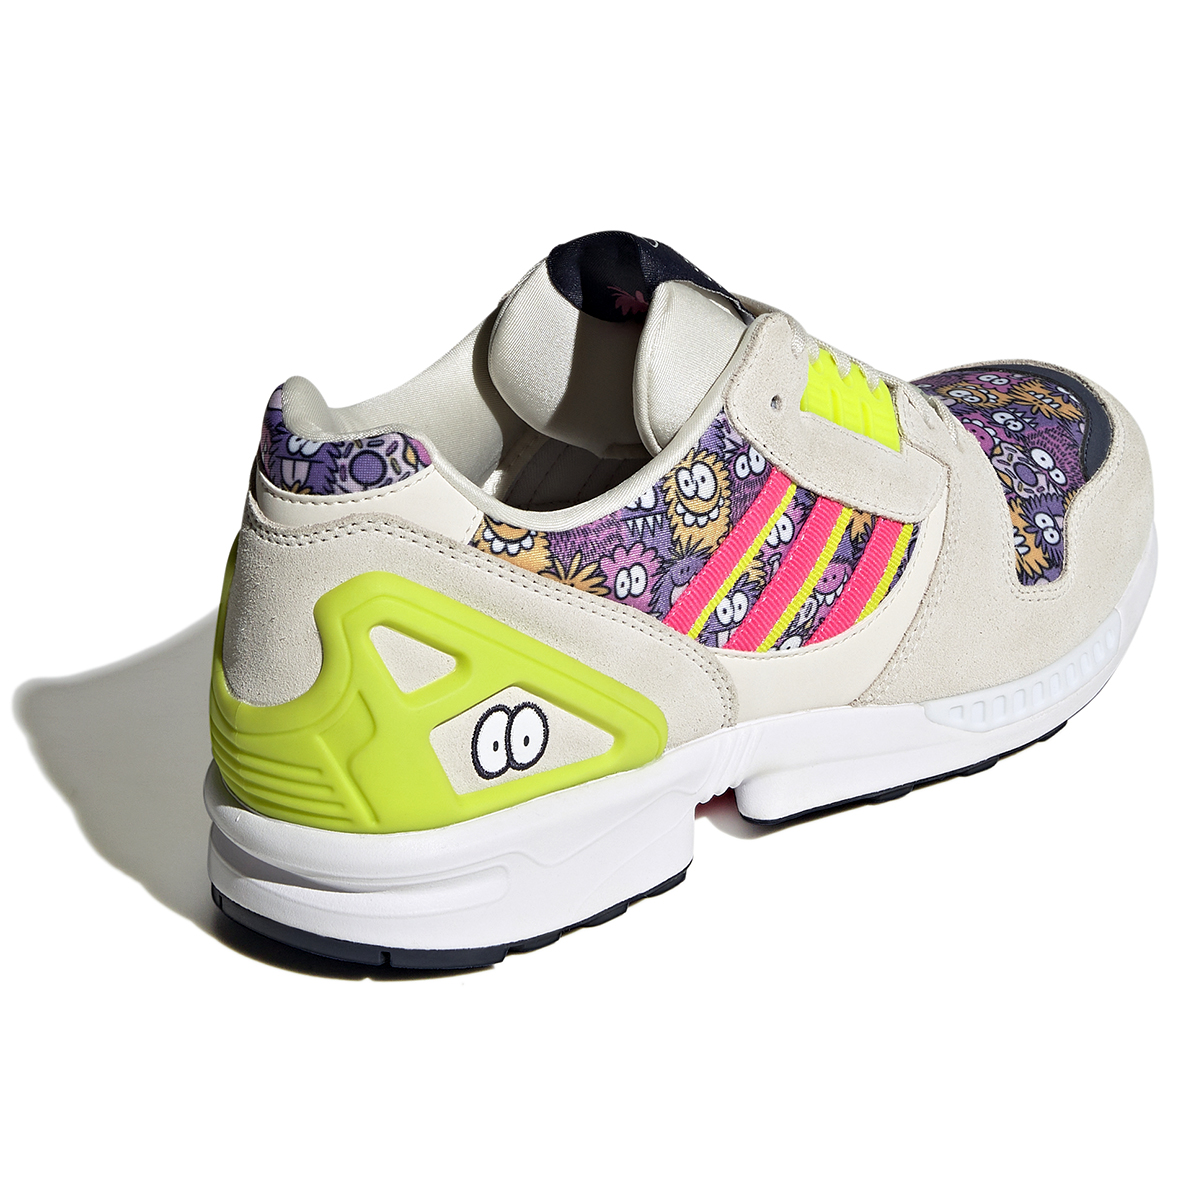 ZX 8000 - Kevin Lyons Monster - Chalk White